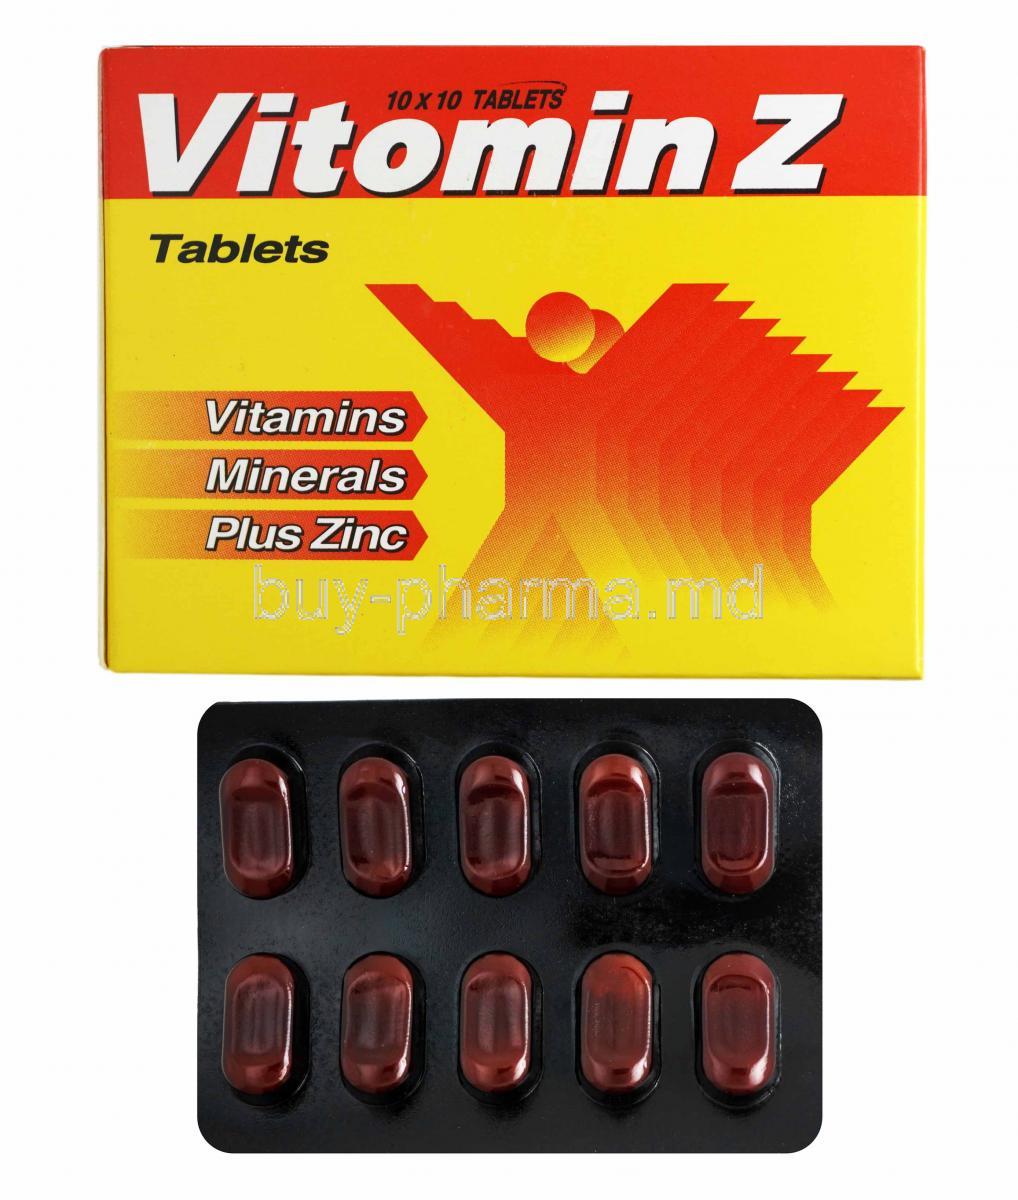 Vitomin Z, Multivitamins, Multimineral and Antioxidants box and tablets